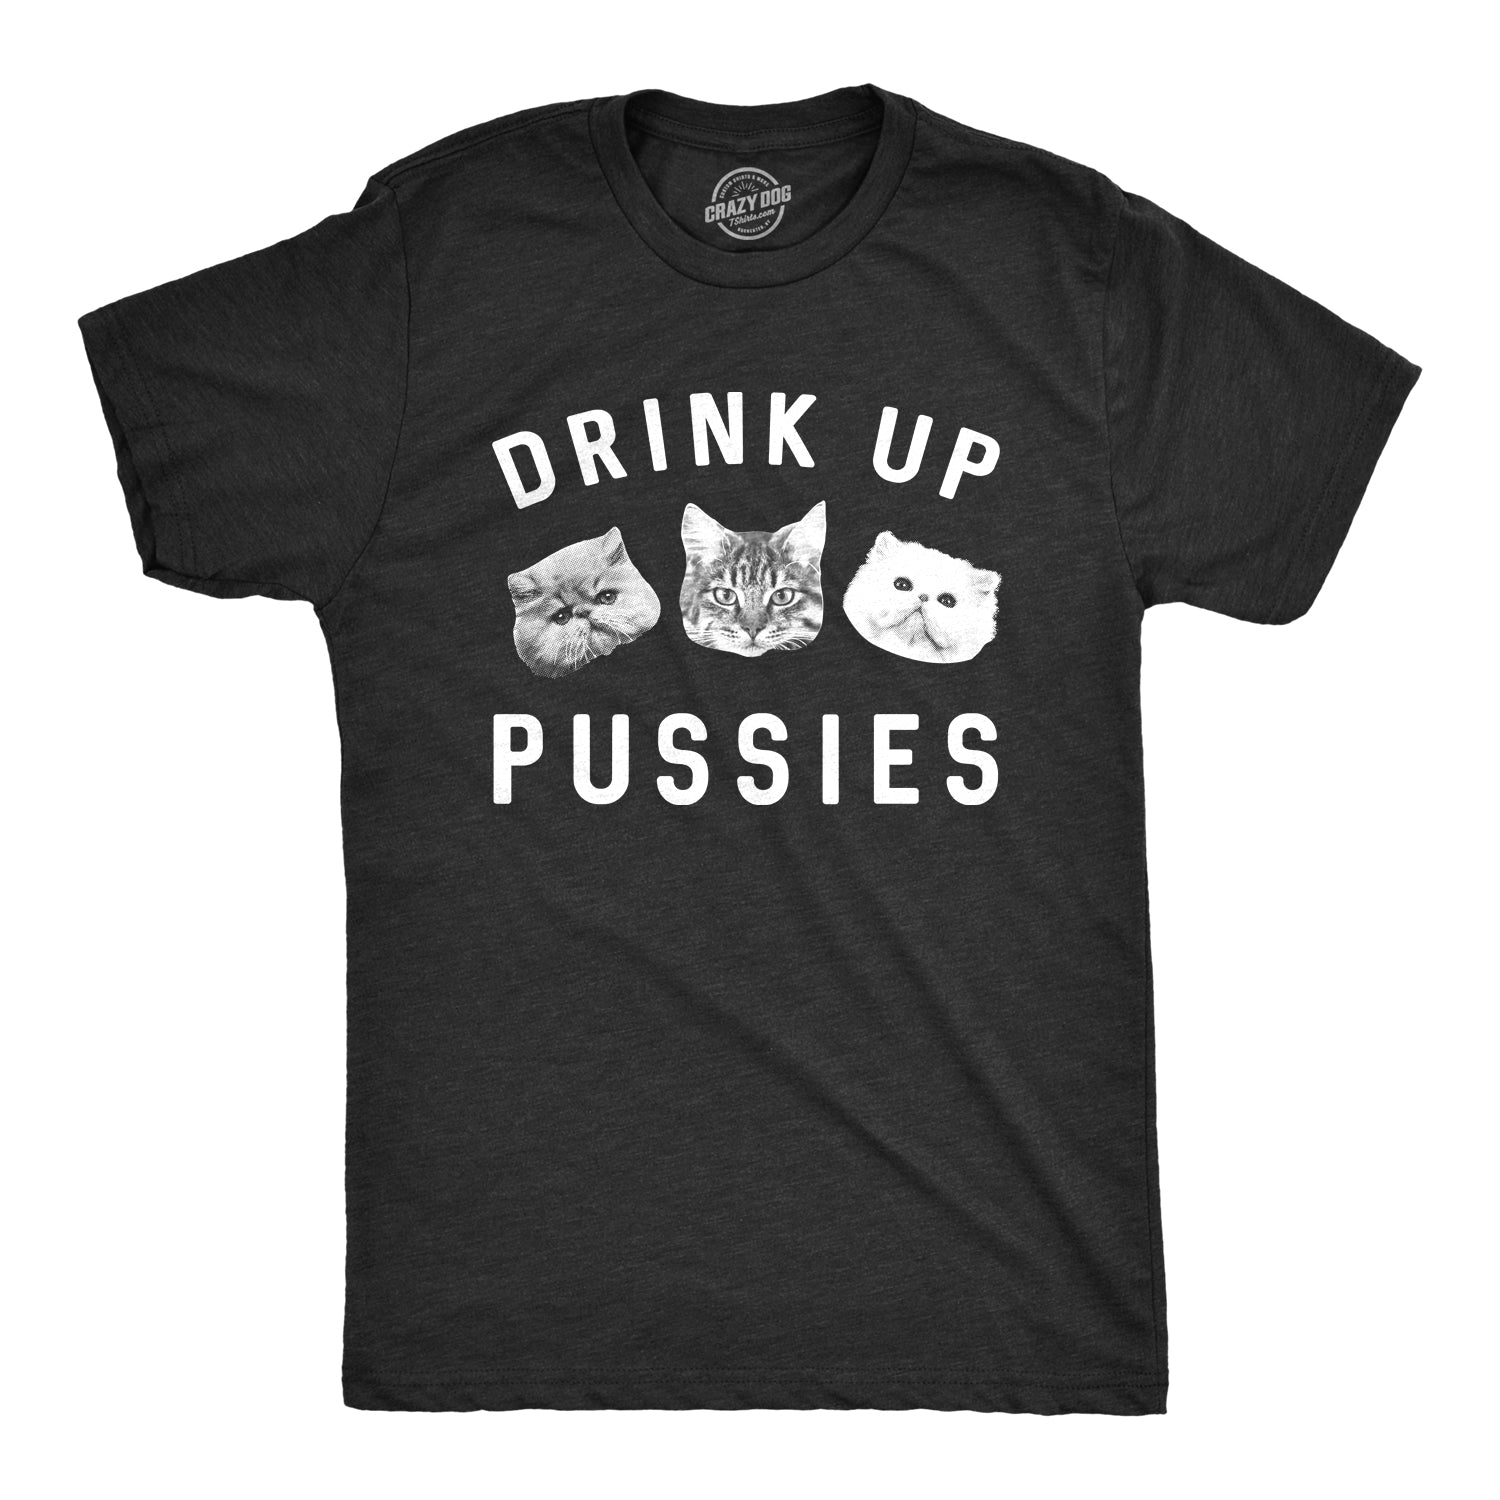 Funny Heather Black Drink Up Pussies Mens T Shirt Nerdy Saint Patrick's Day Cat Drinking Tee